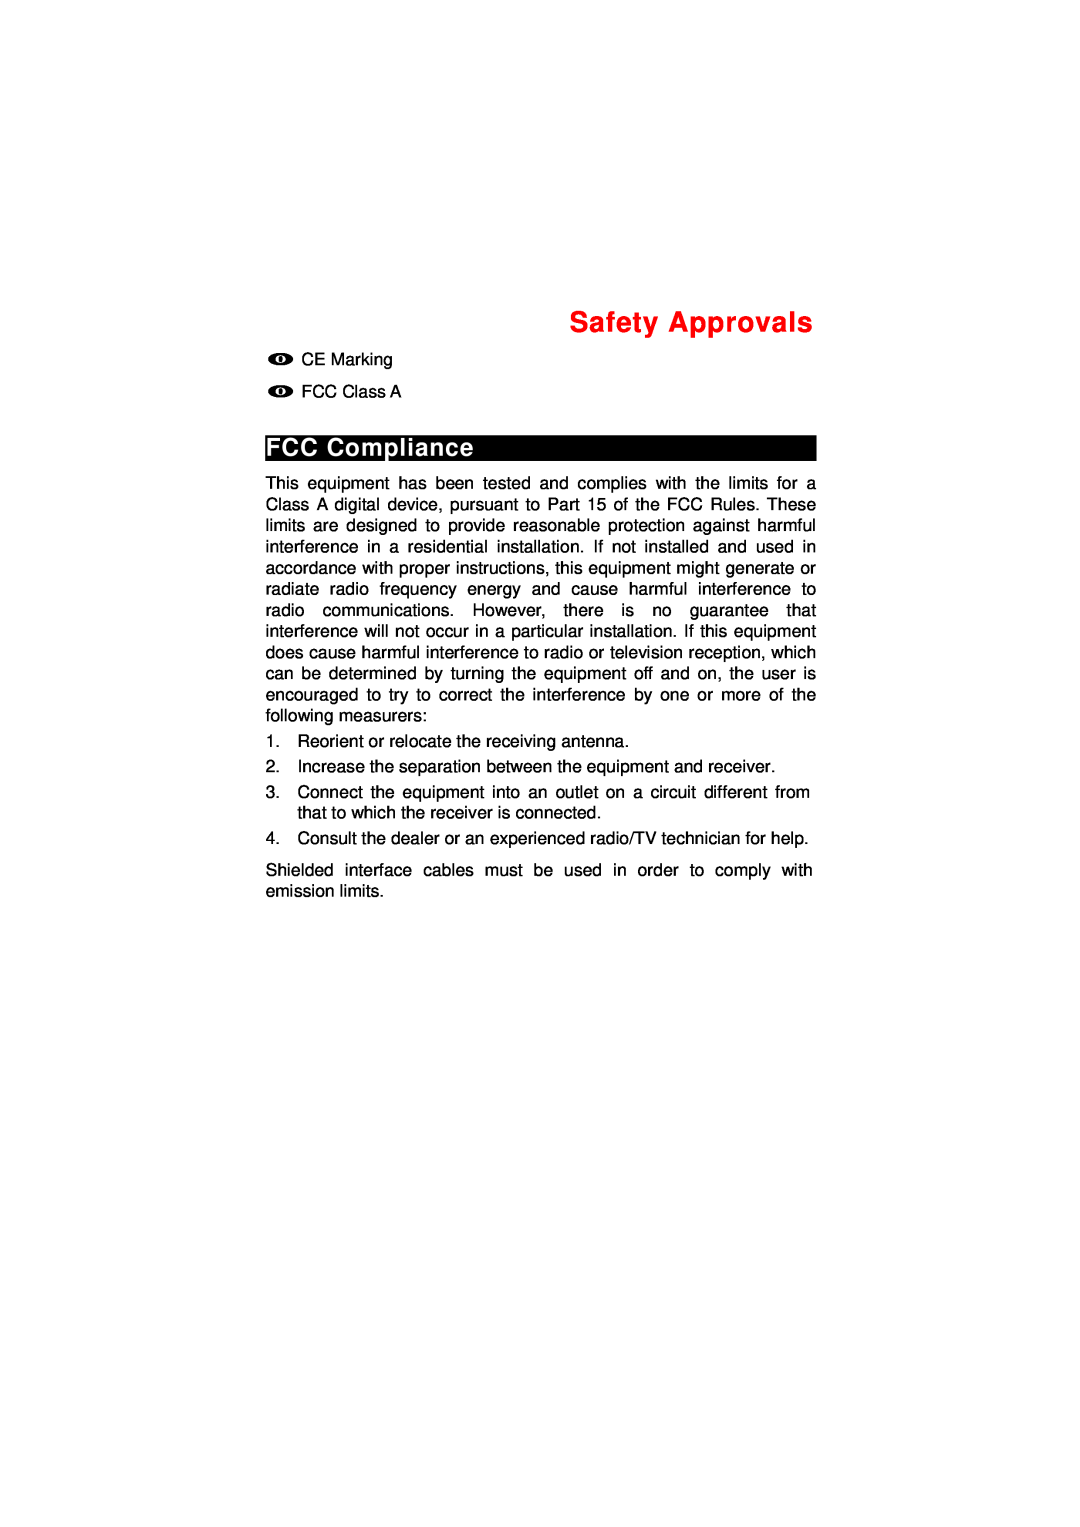 Acnodes FPC 8059 user manual Safety Approvals, FCC Compliance 